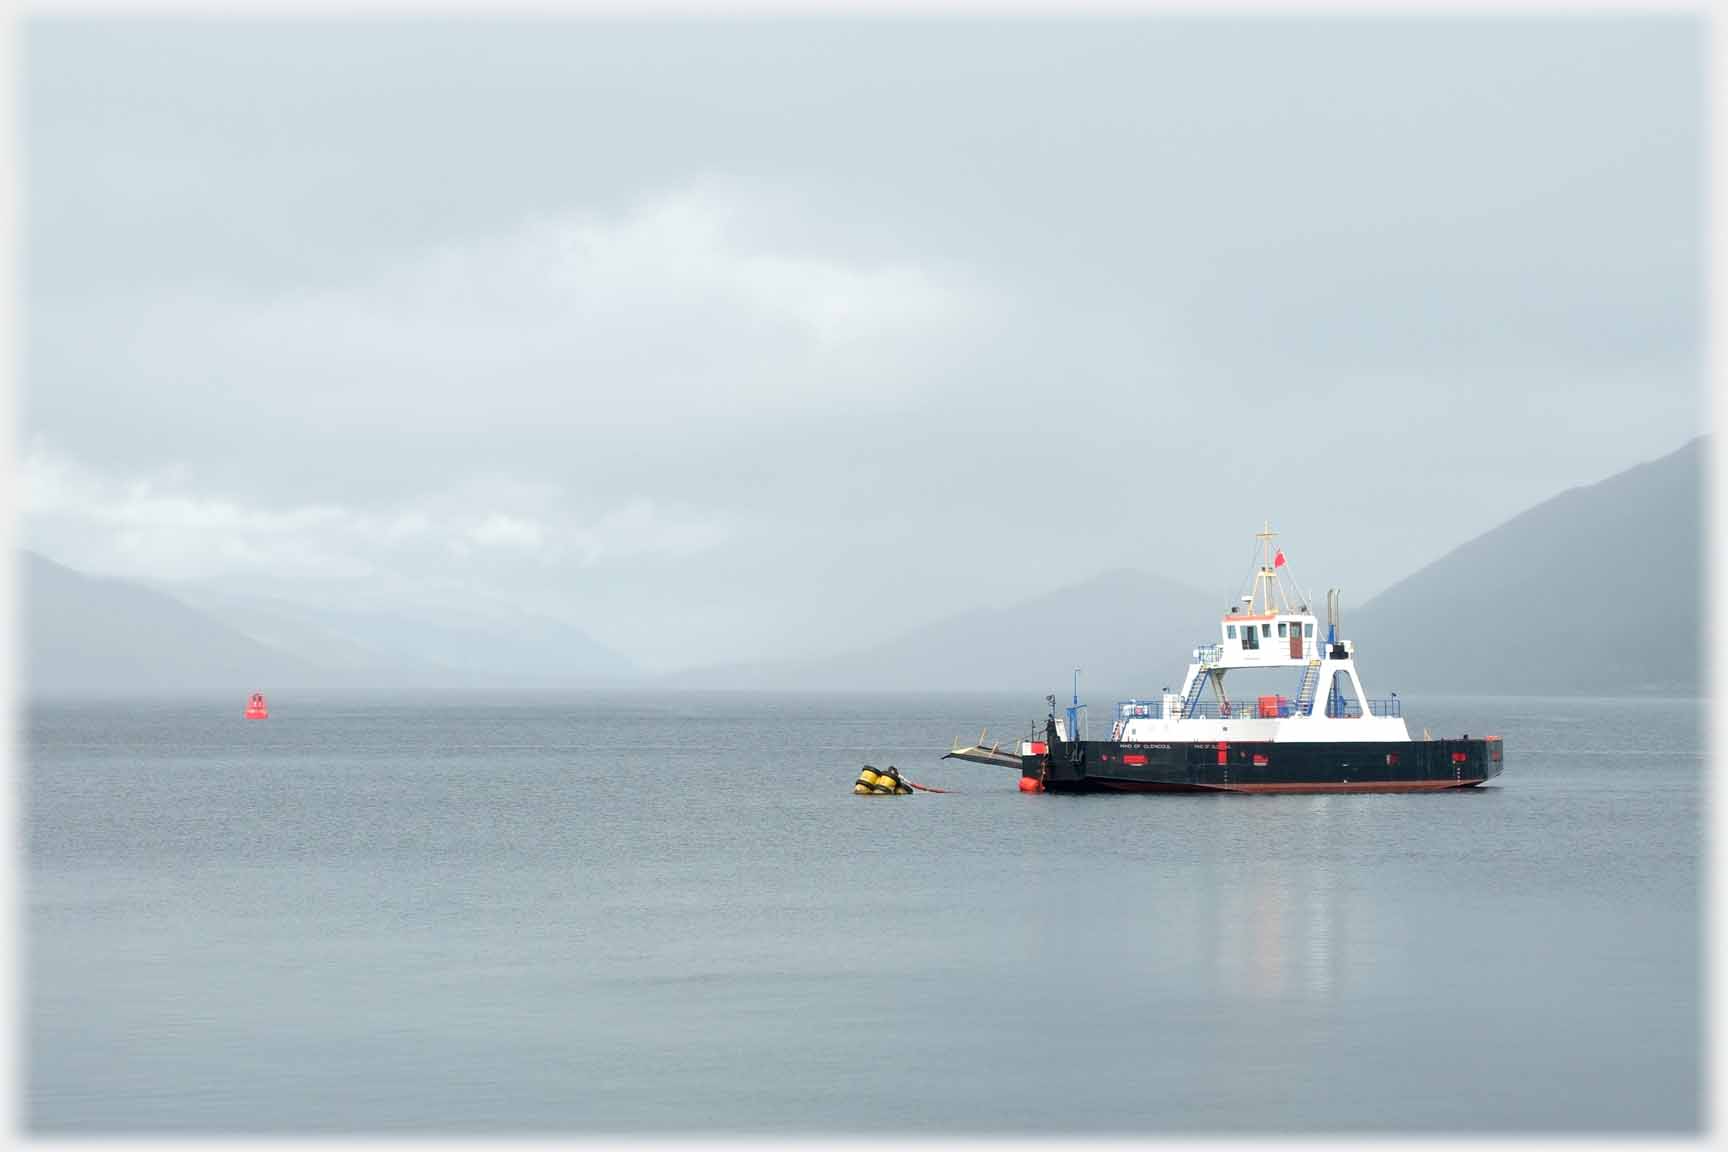 Ferry moored offshore, background hills veiled in drizzle.